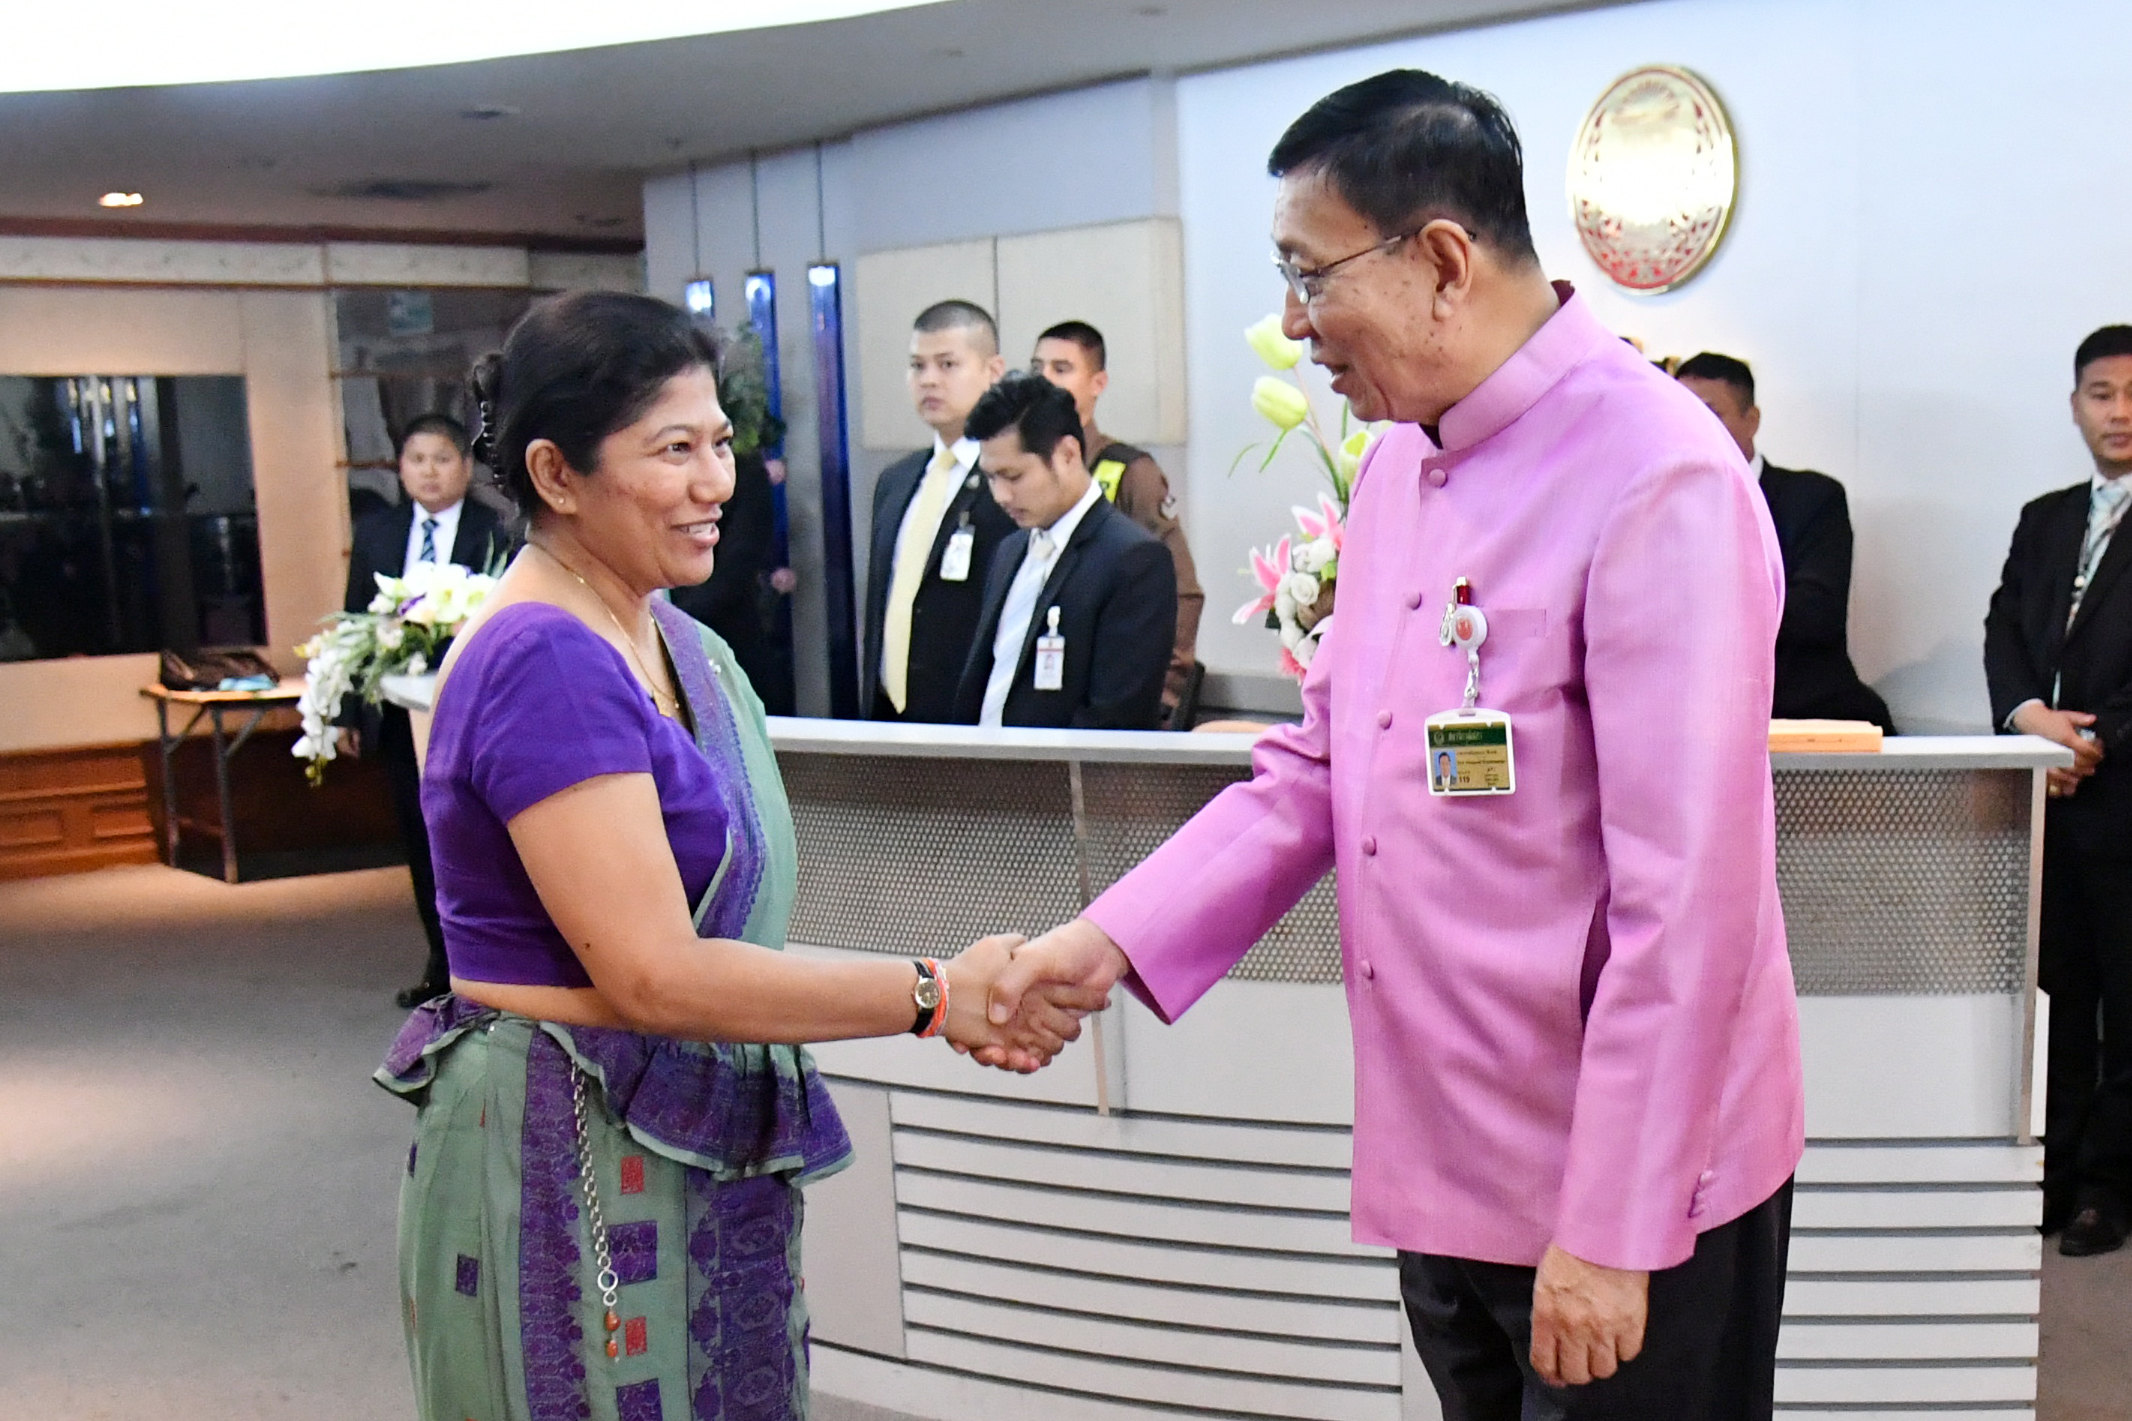 Ambassador of the Democratic Socialist Republic of Sri Lanka to Thailand Paid a Courtesy Call on the President of the Senate (Wednesday 12 February 2020)